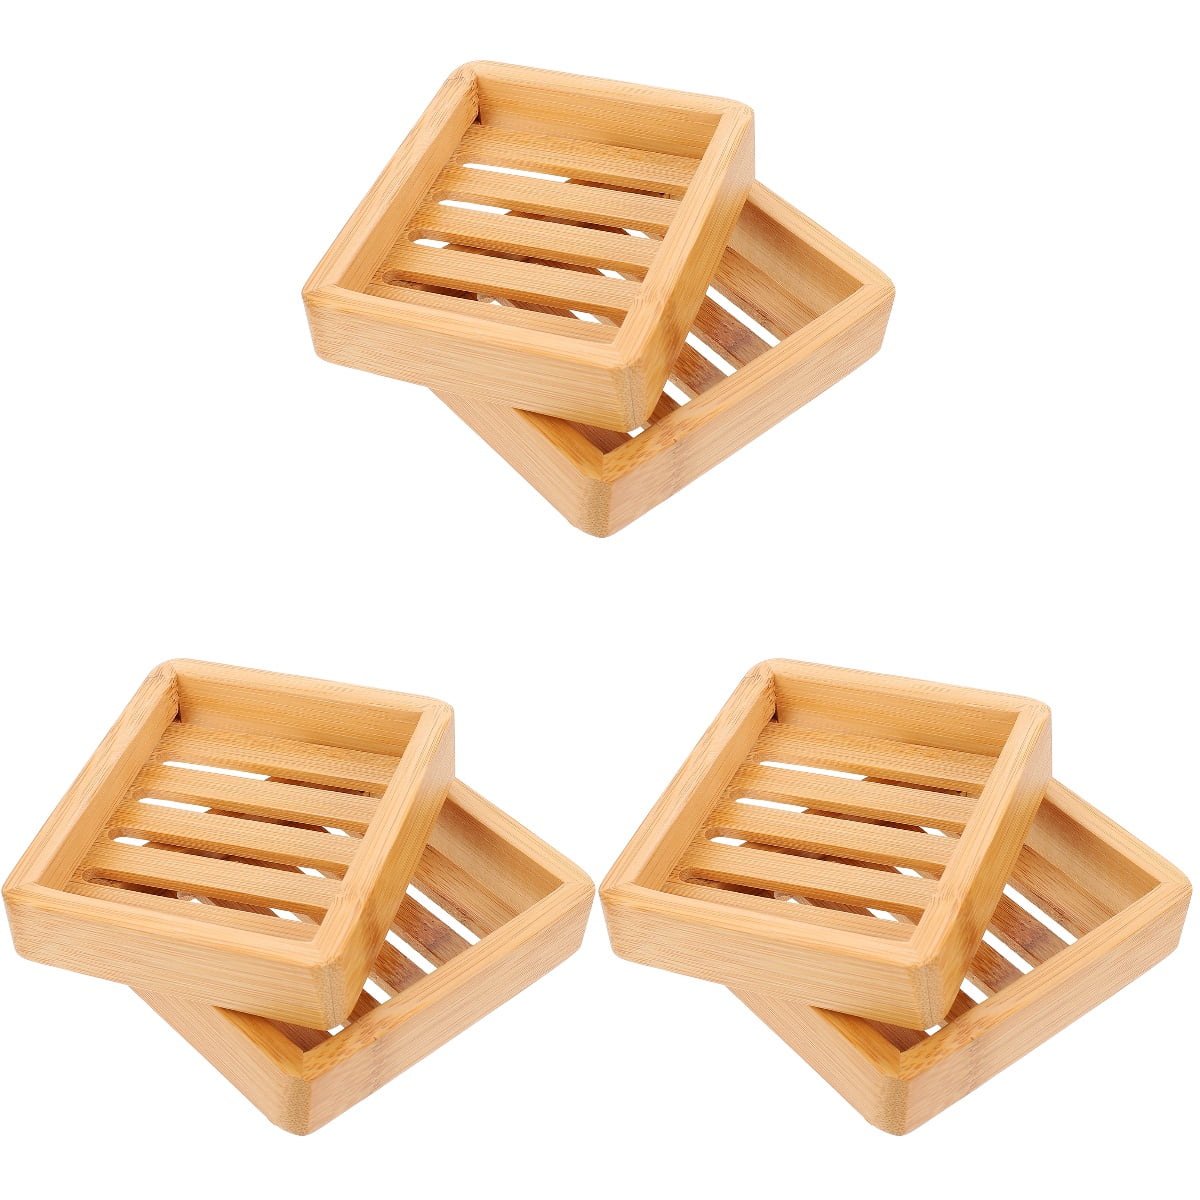 6 Pcs Bathroom Wooden Soap Cases Slotted Draining Rack Soap Holders for ...